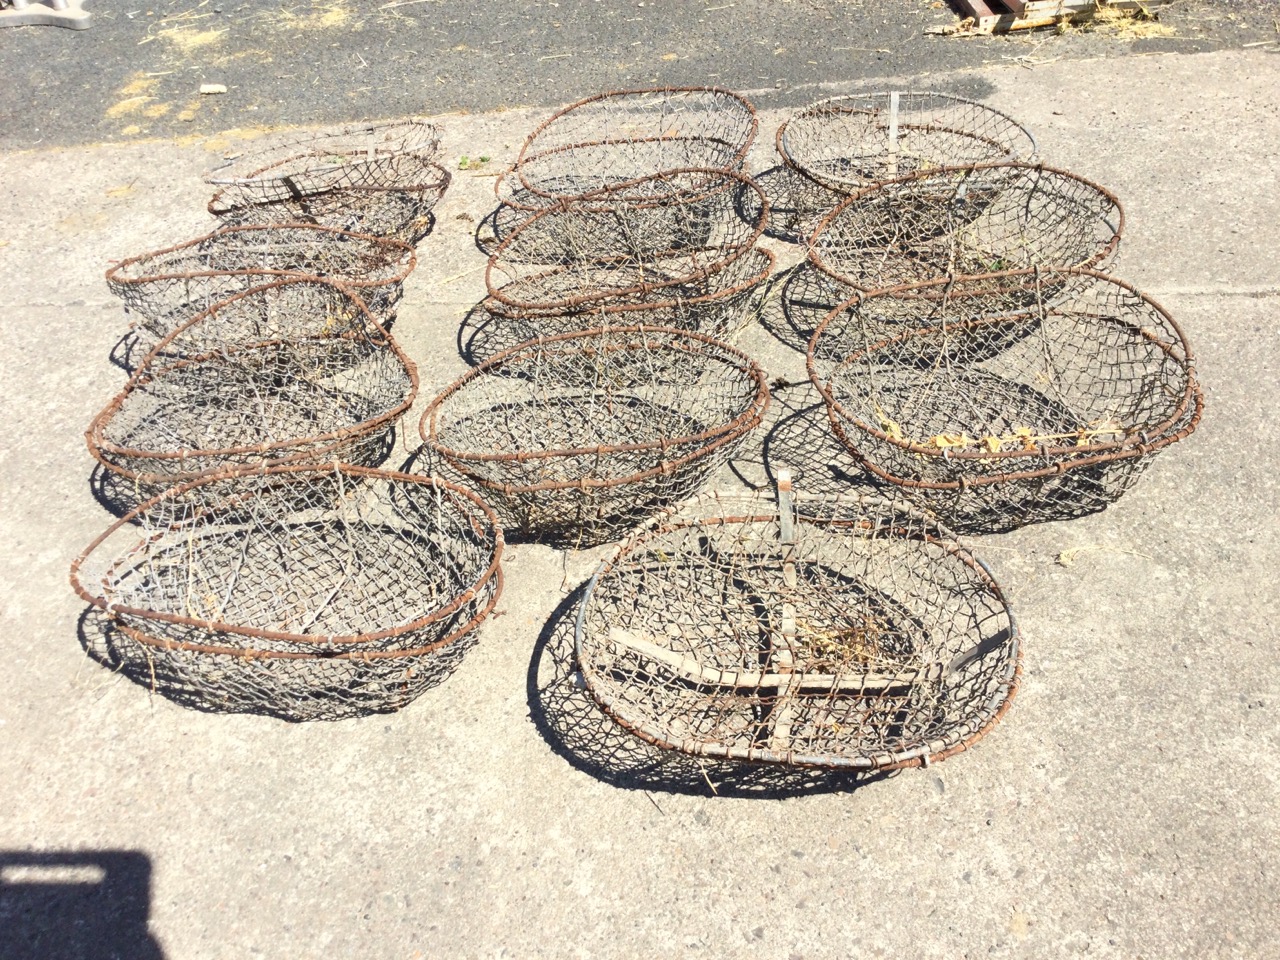 Twenty-two oval mesh potato cage baskets, each with hand-hole apertures to side rims. (22)